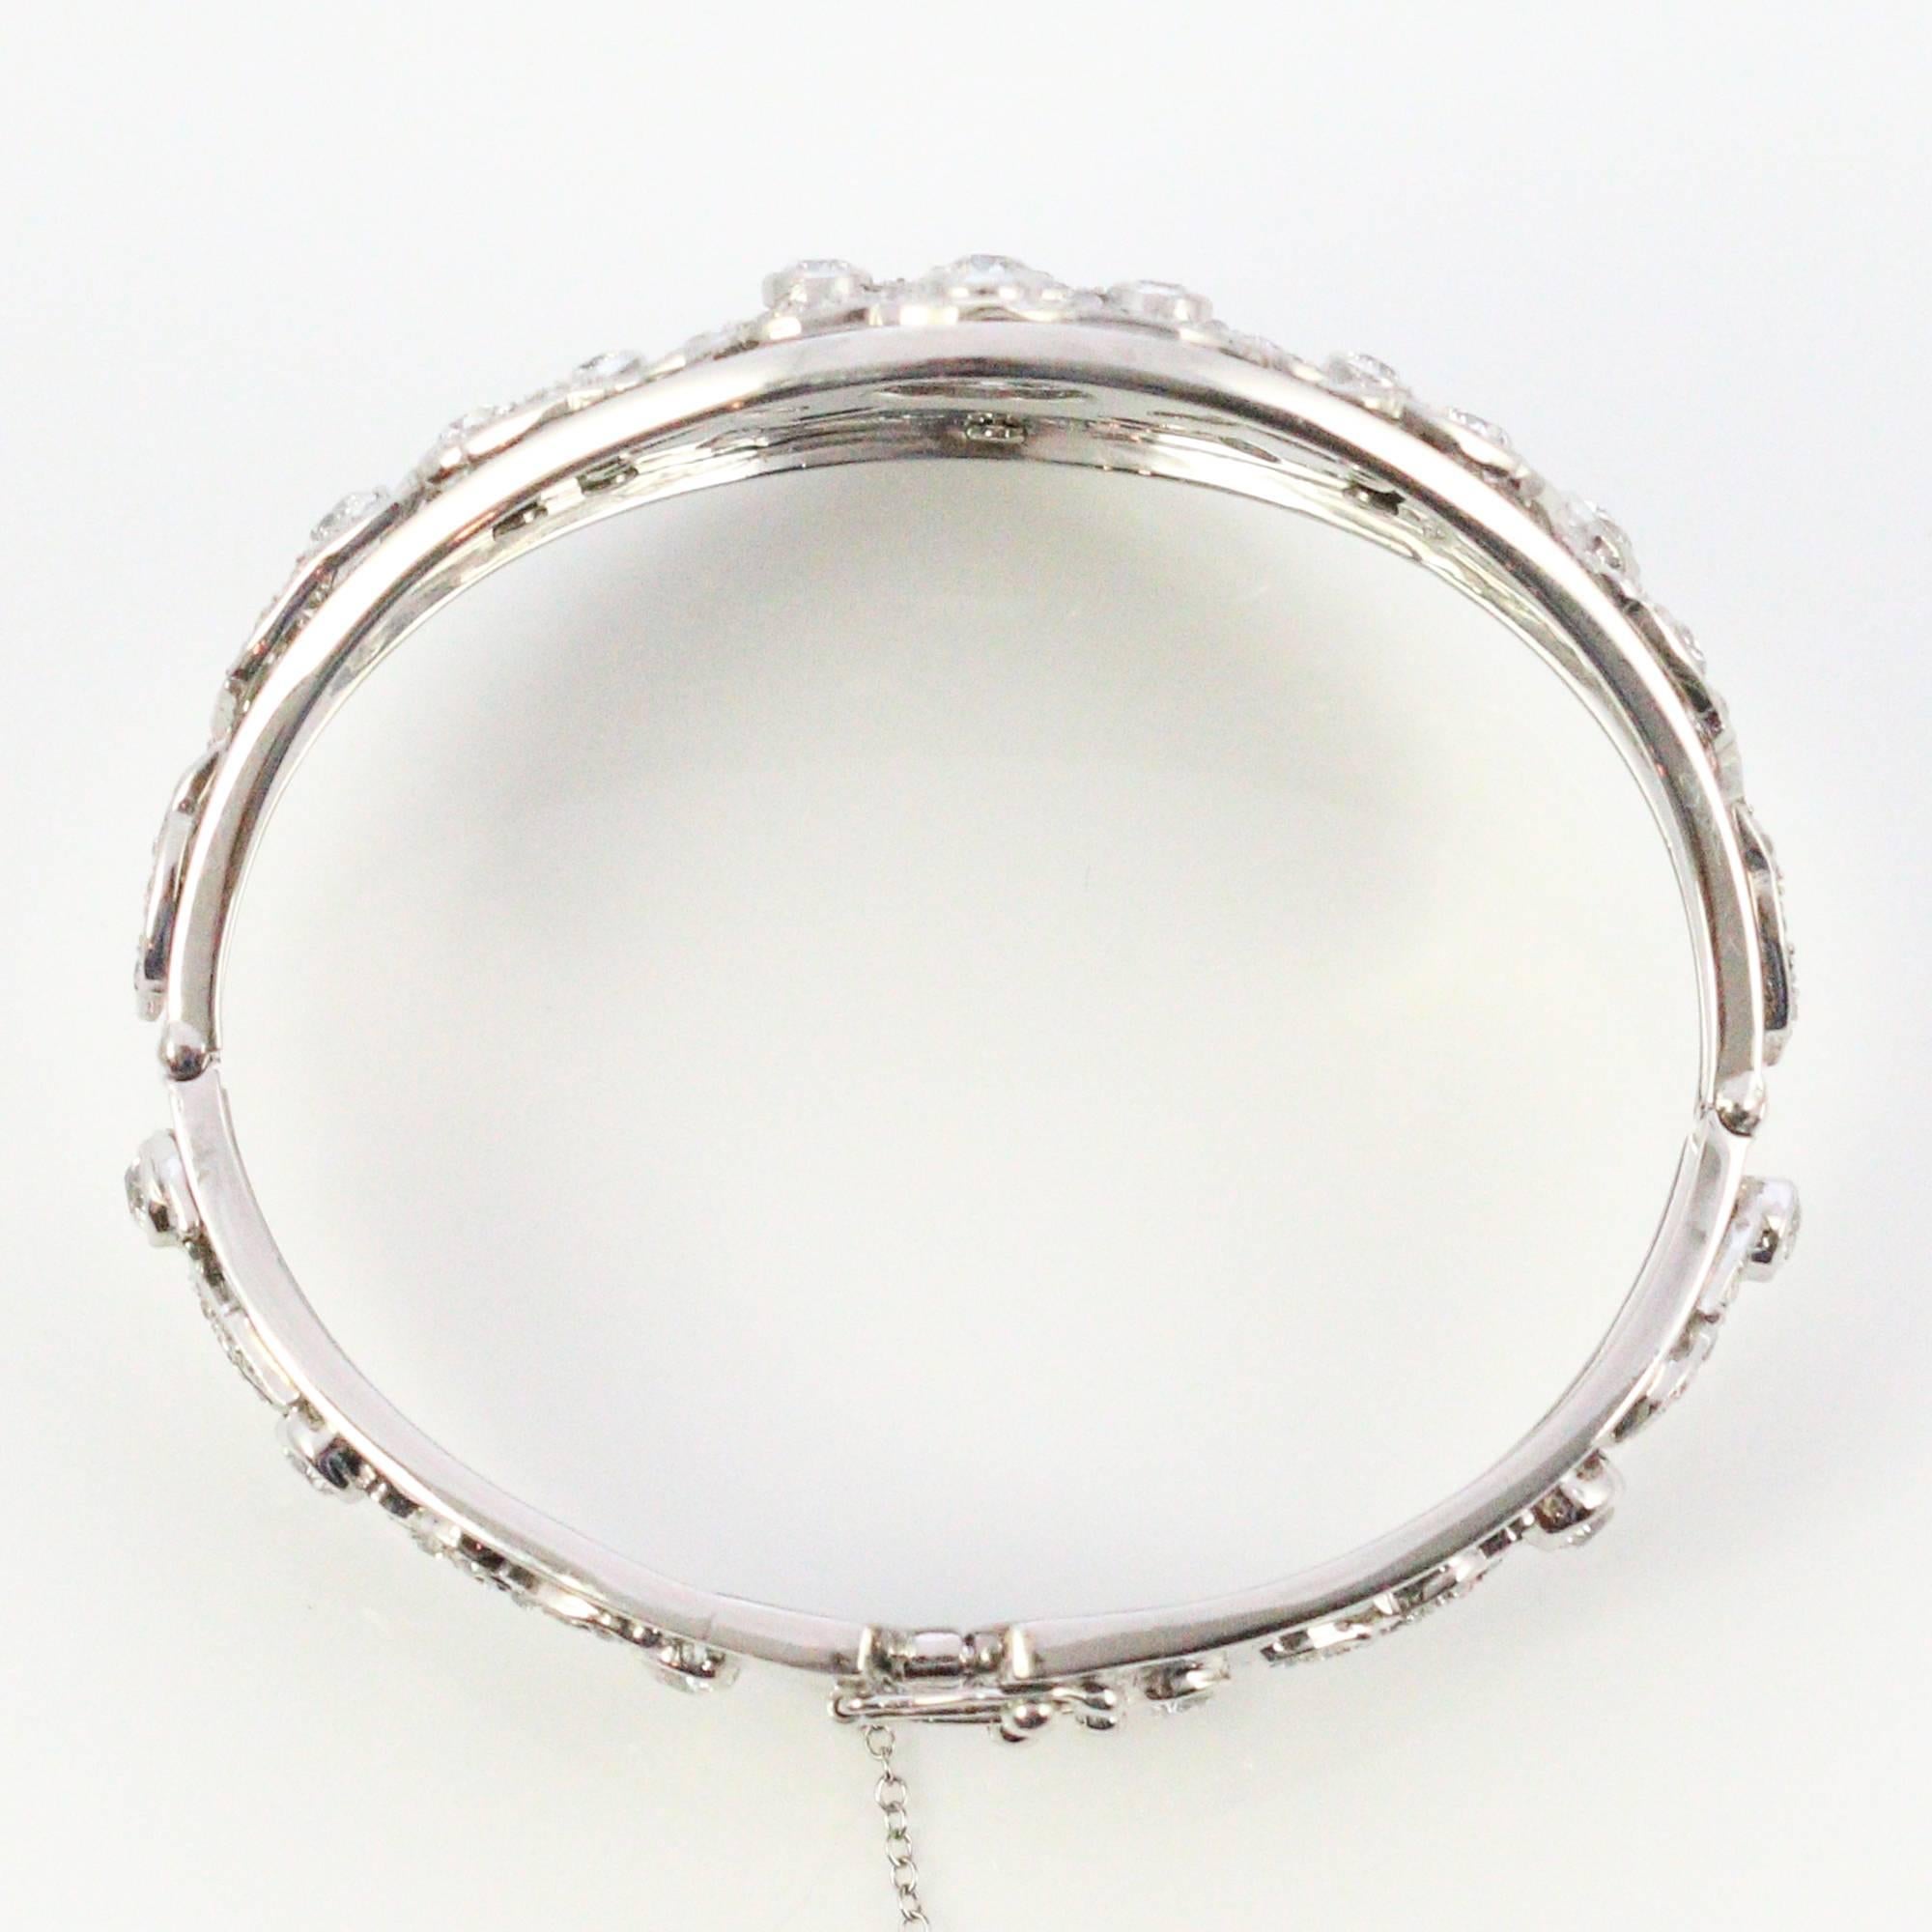 New meets old in this spectacular bangle bracelet! This piece was clearly crafted by a highly trained master jeweler who repurposed Edwardian garland and mounted it onto a modern bangle. The detail work on this piece is nothing short of exquisite!